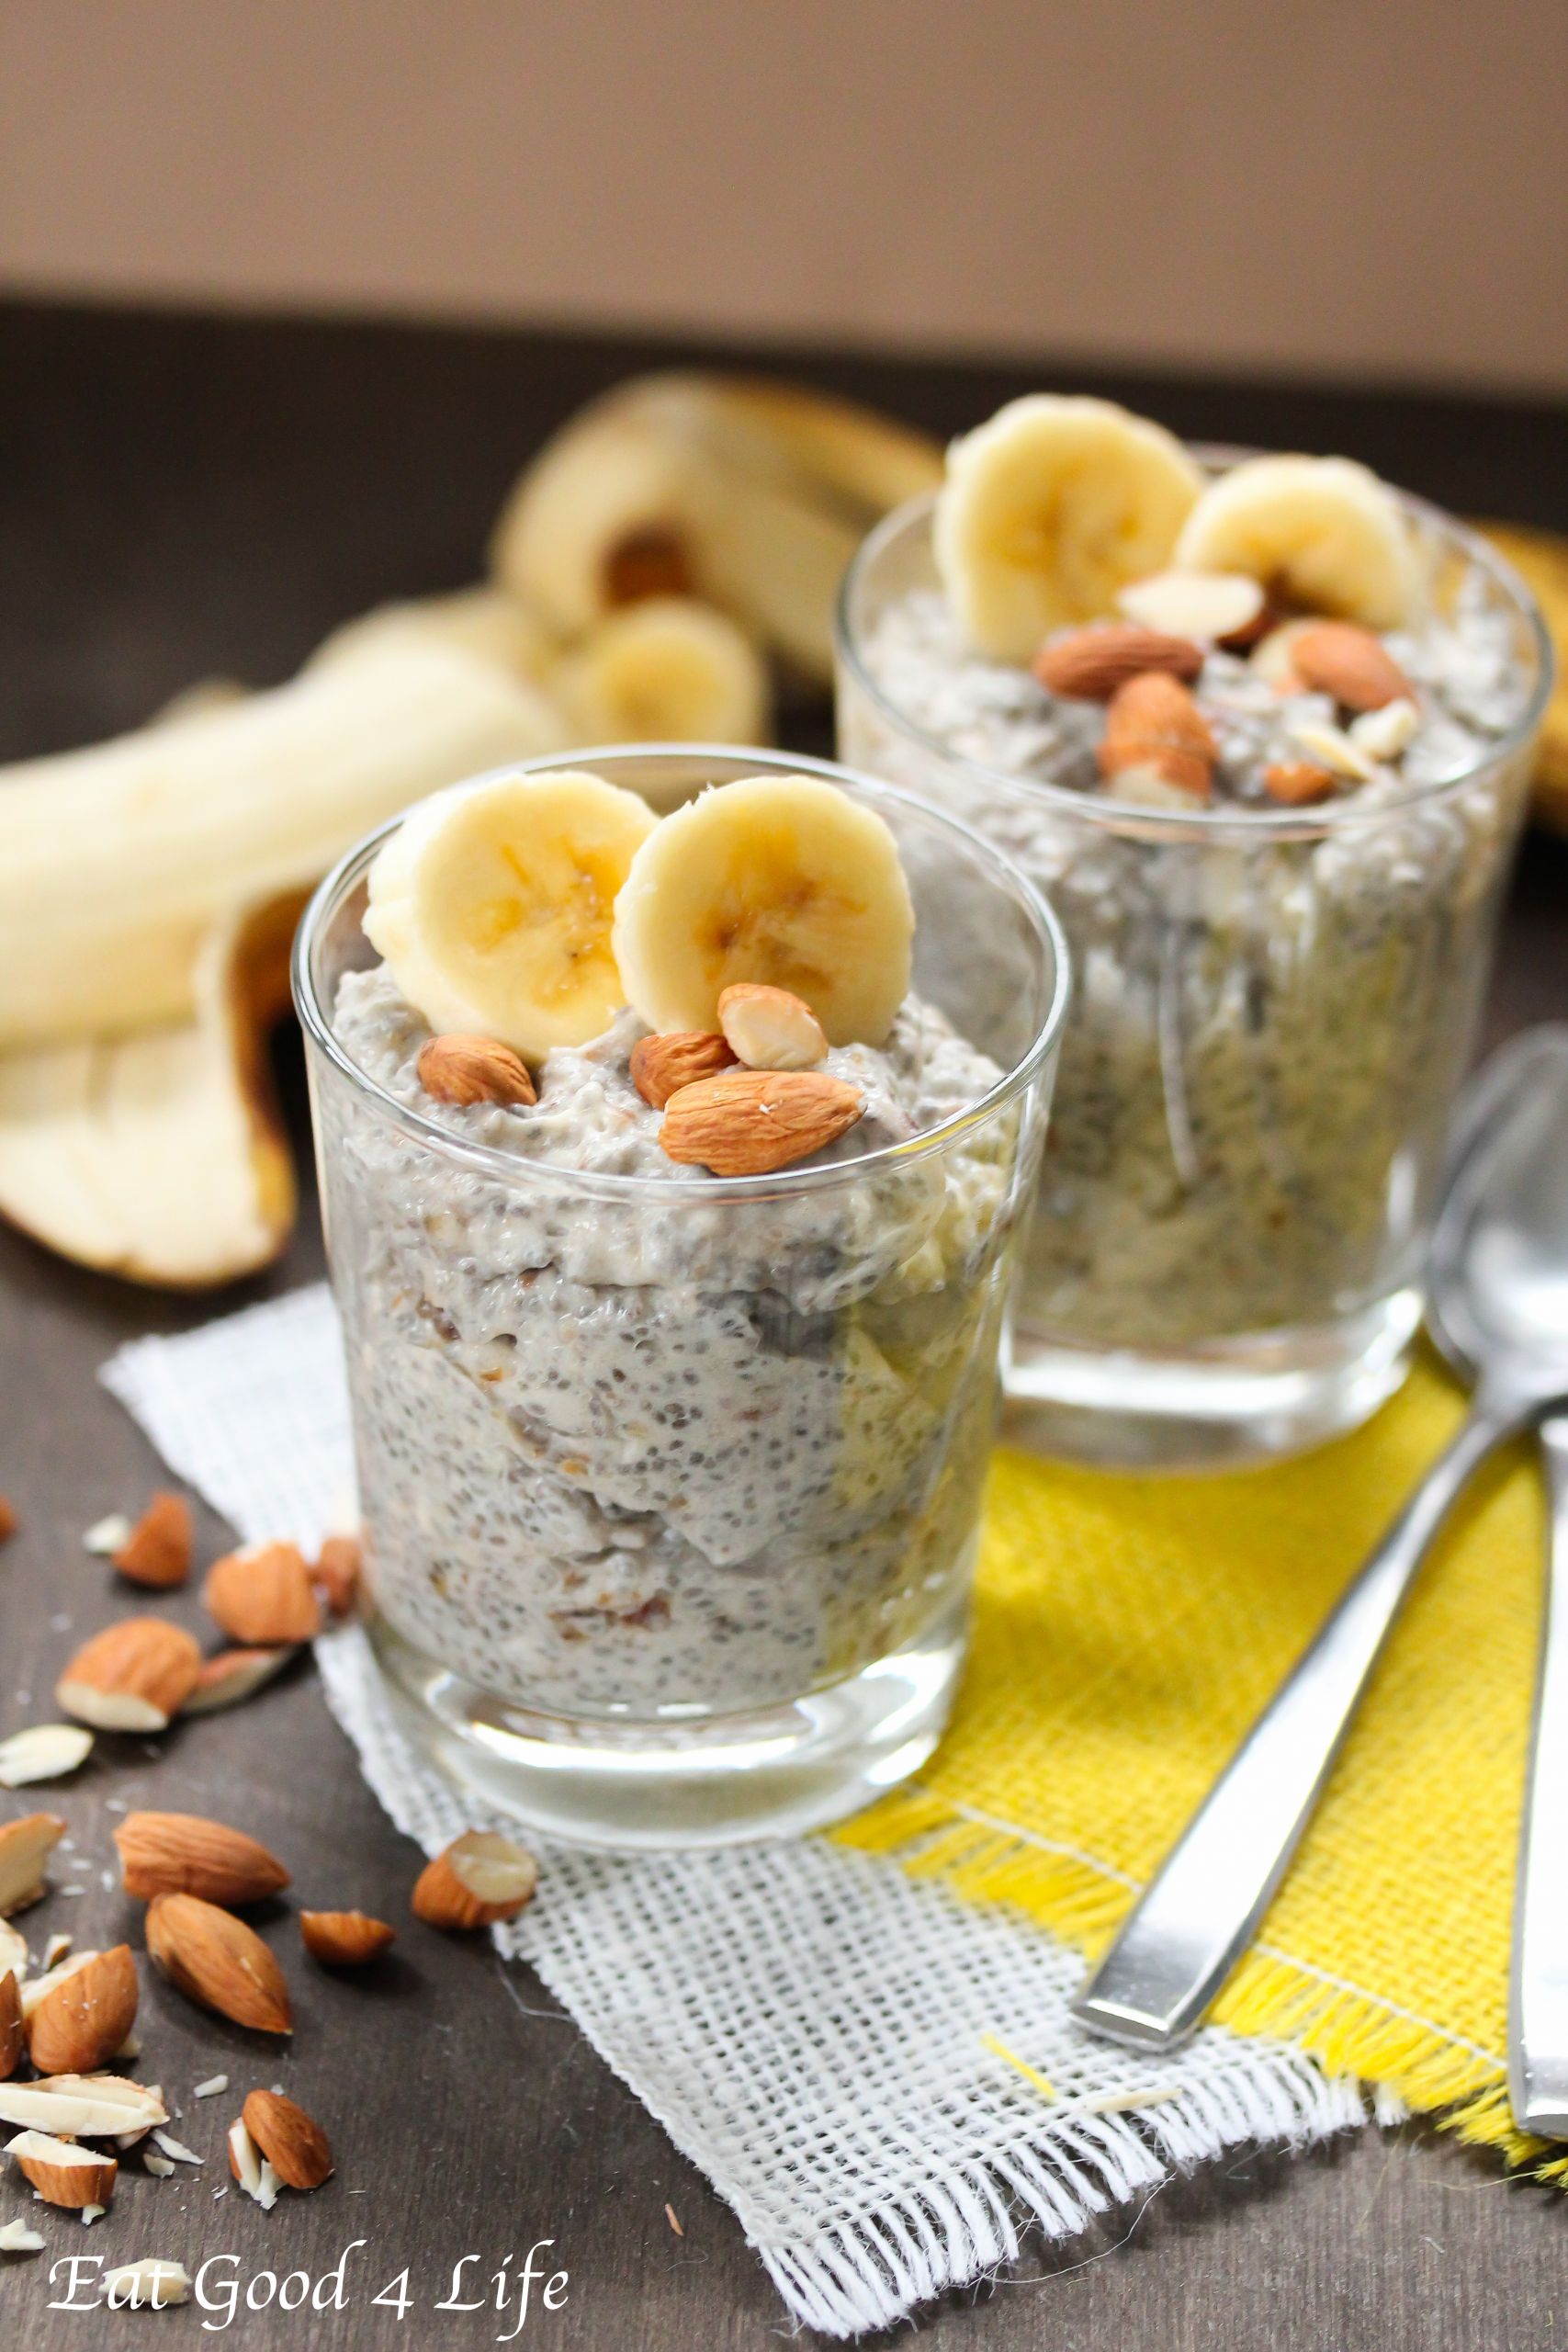 Top 20 Chia Seeds Breakfast Recipes - Best Recipes Ideas and Collections